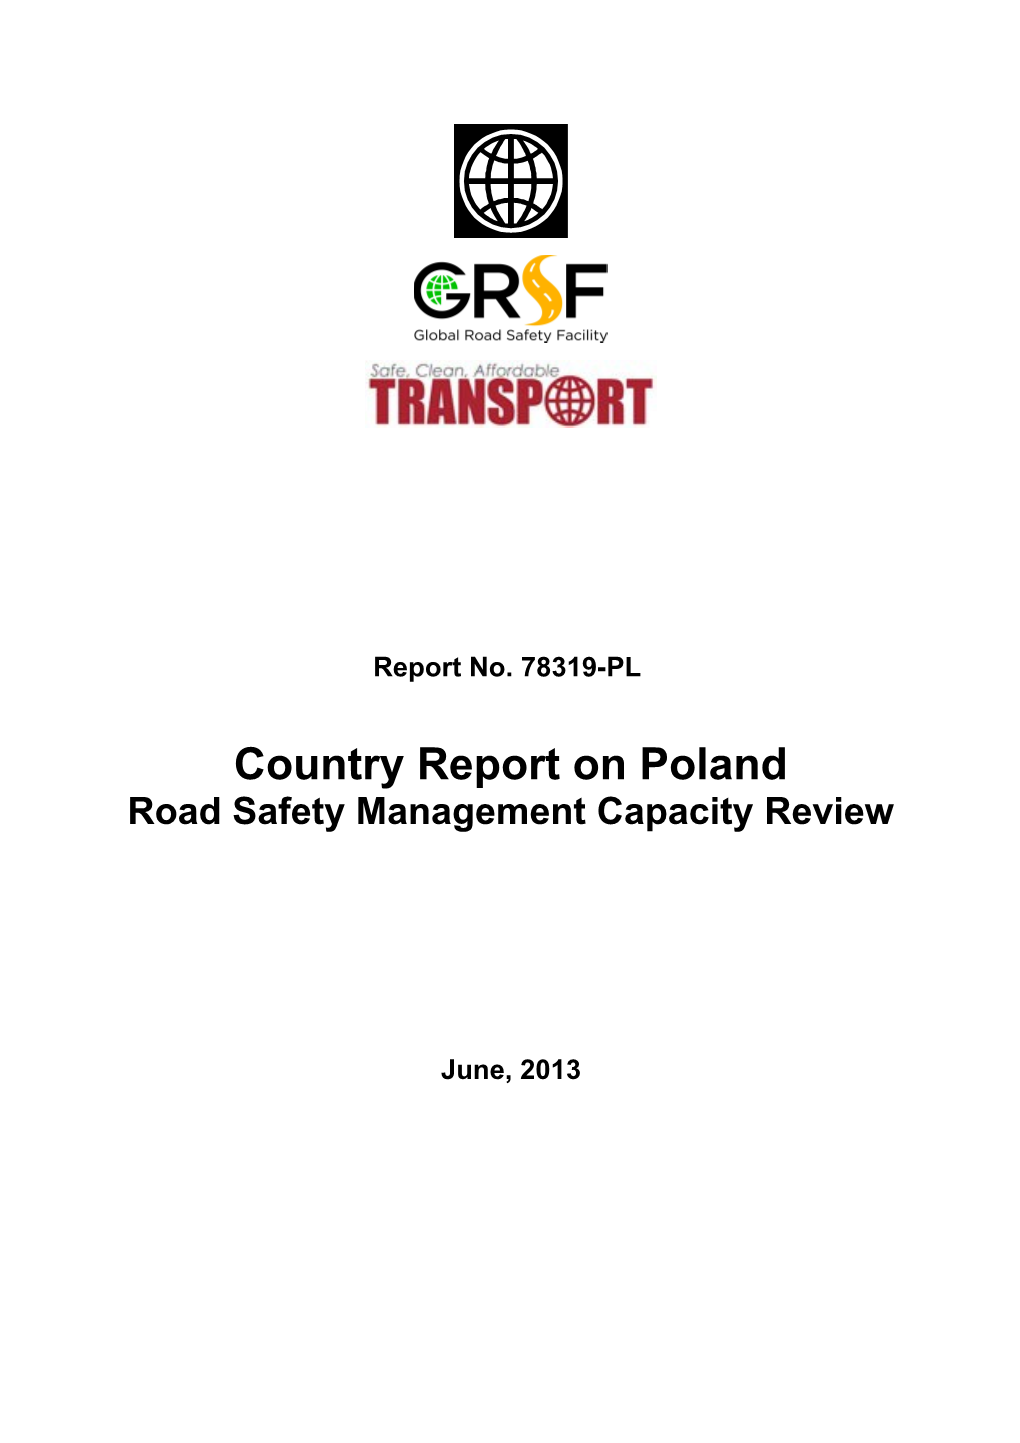 Road Safety Management Capacity Review